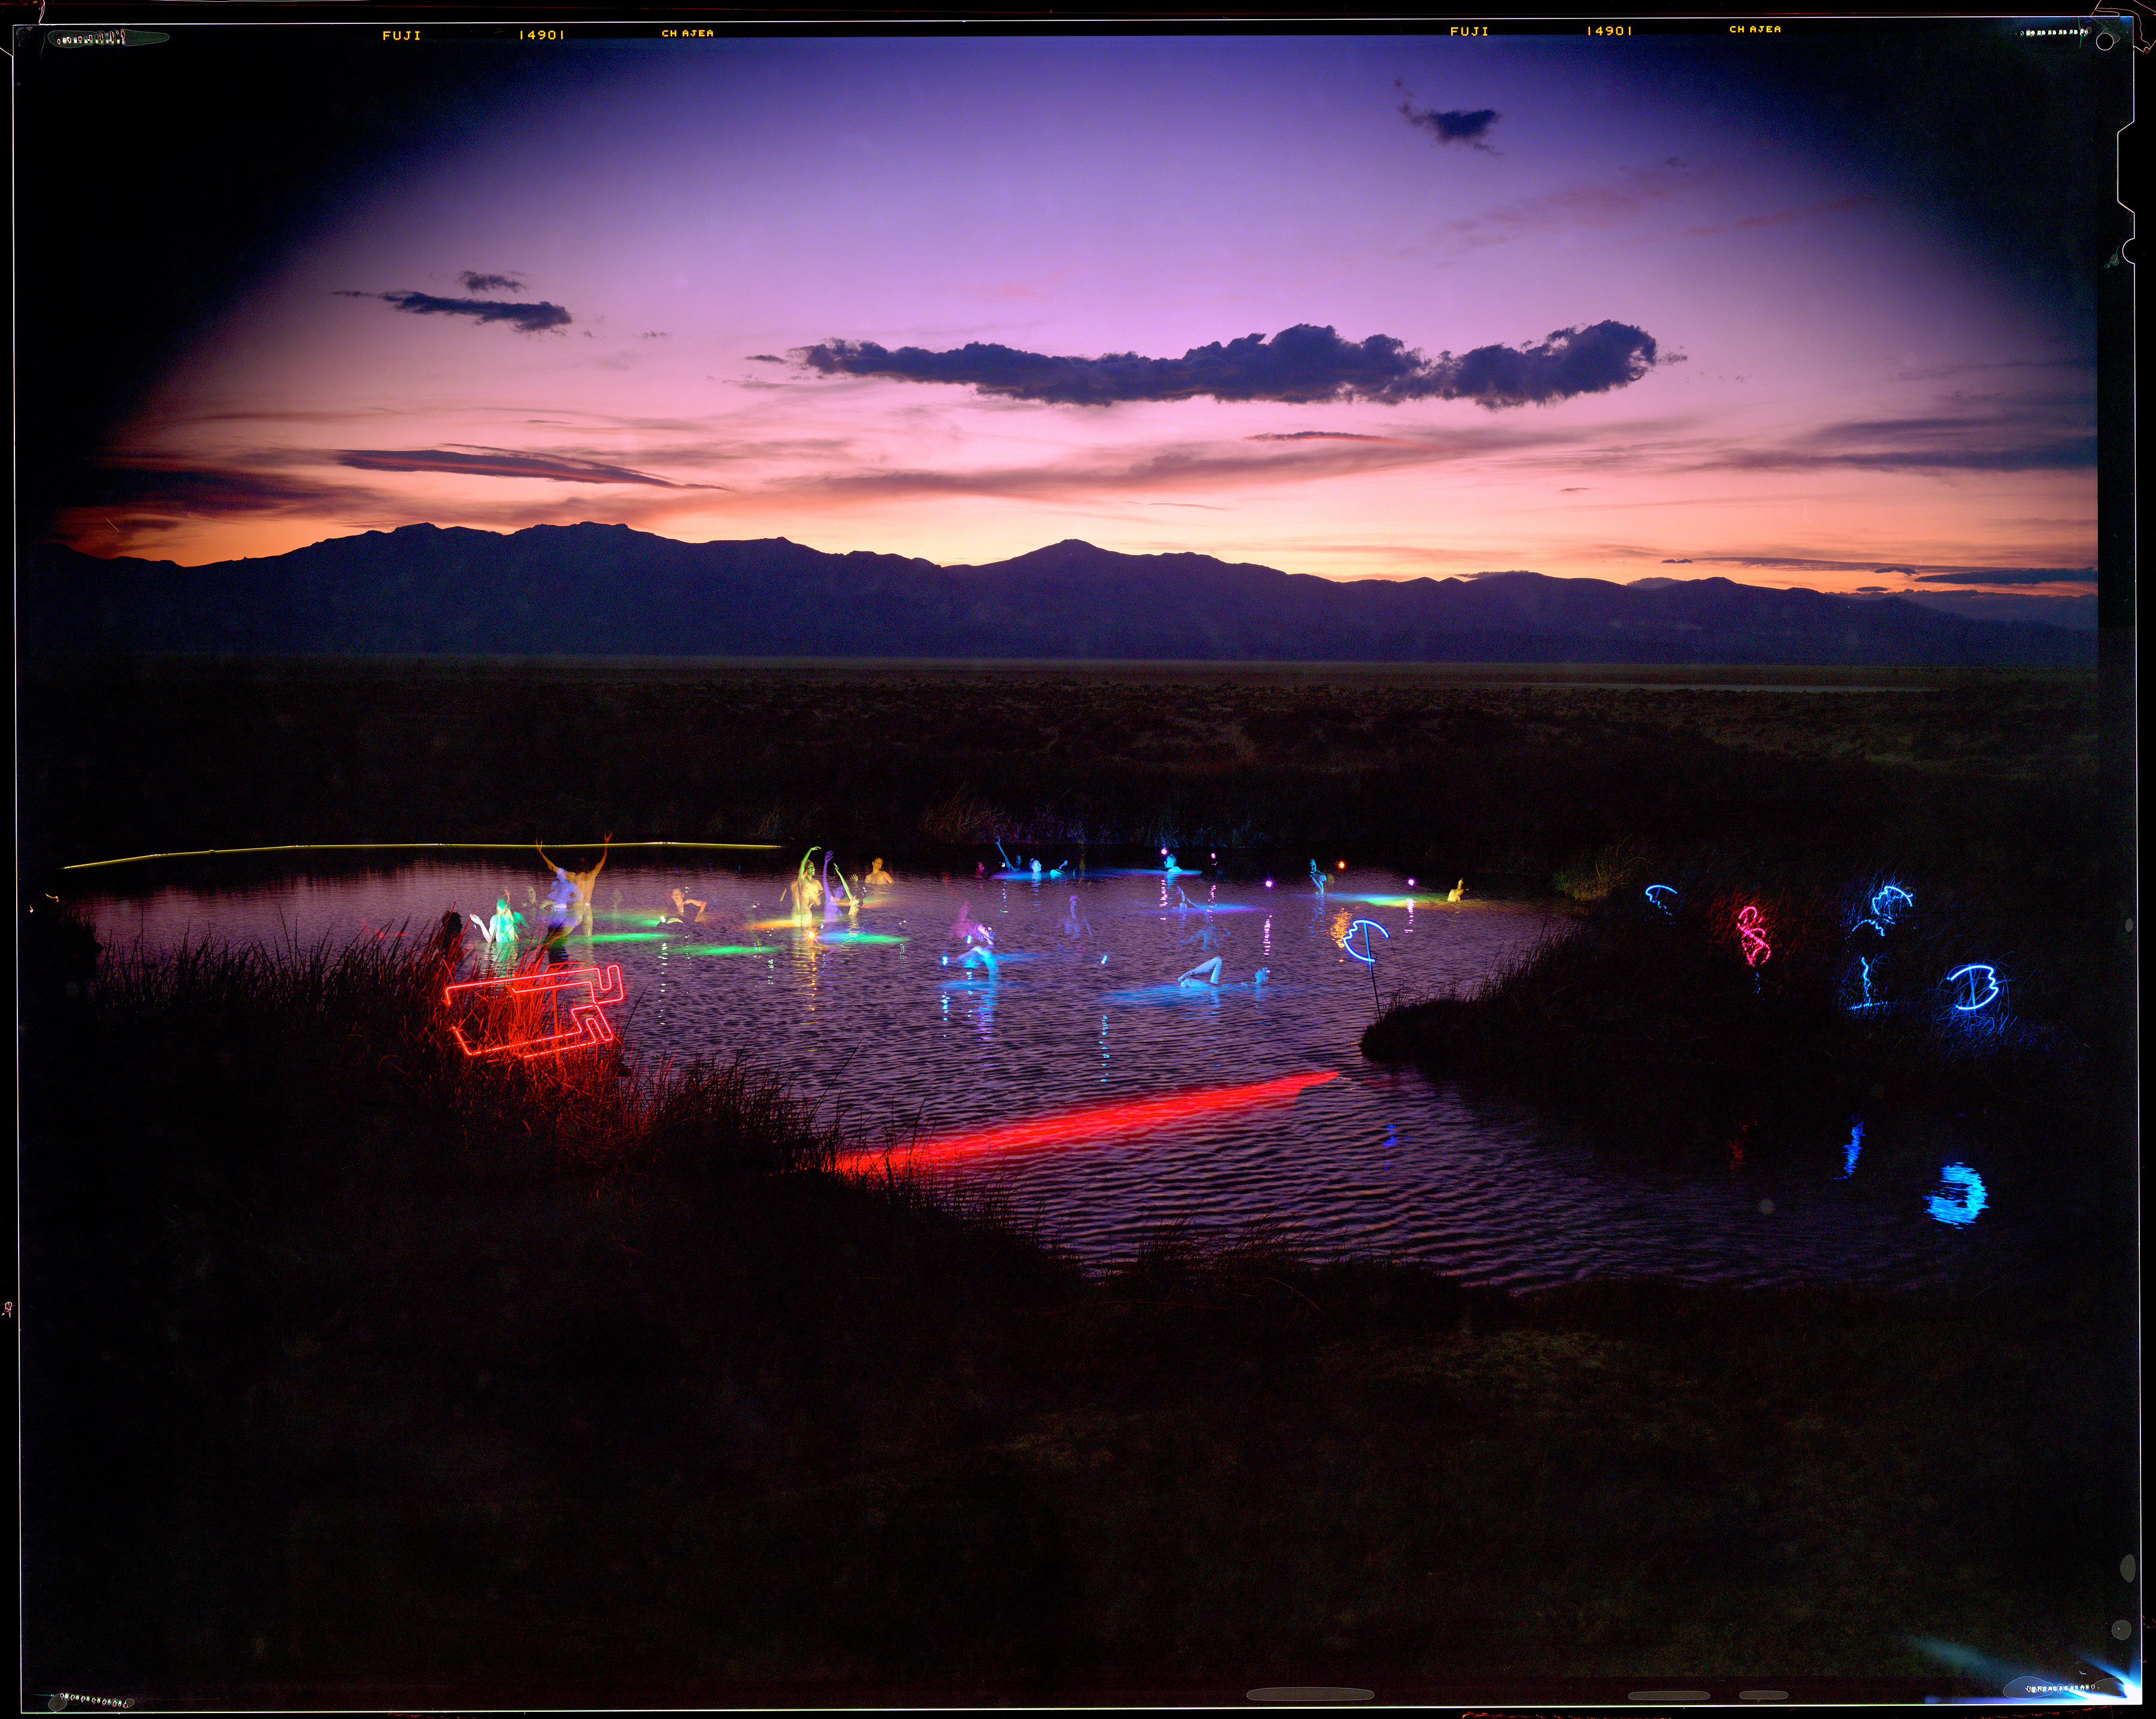 Black Rock Hot Springs-Blessed by Water Sprites and Submerged Neon-Commencing Desert Siteworks